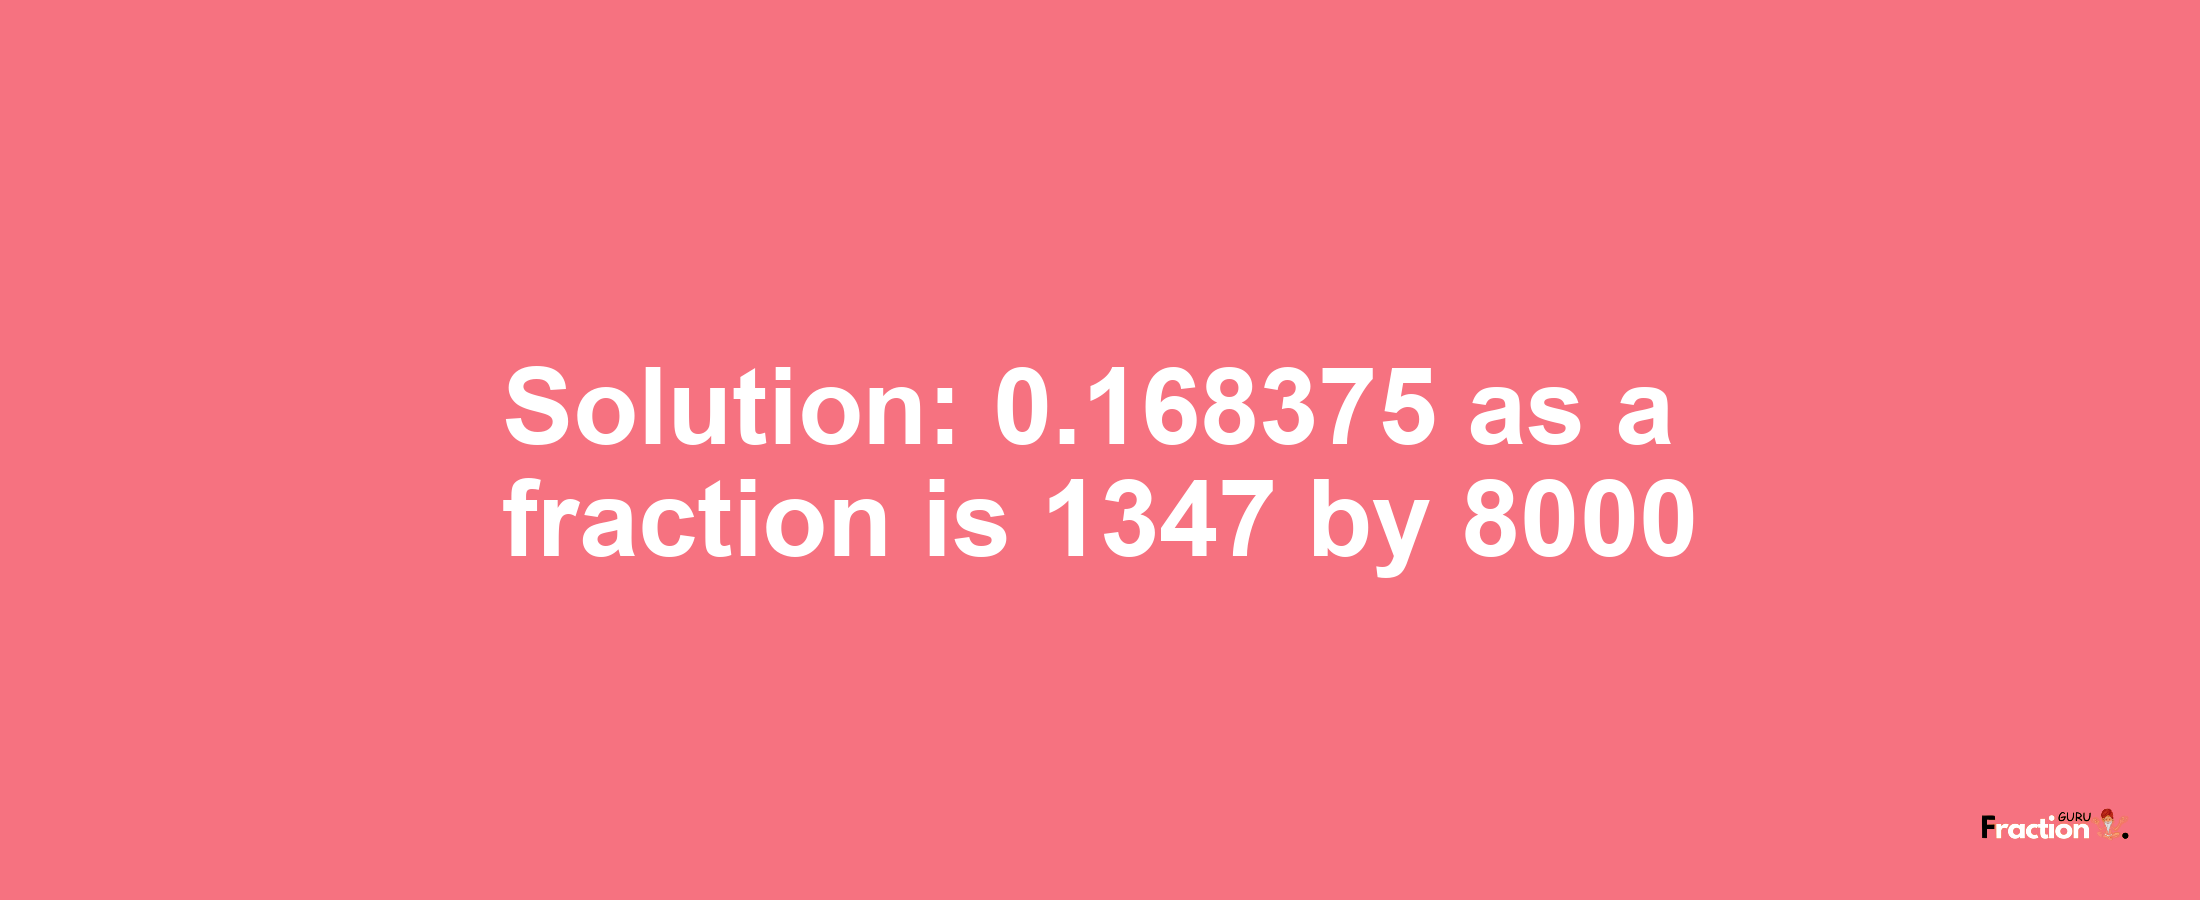 Solution:0.168375 as a fraction is 1347/8000